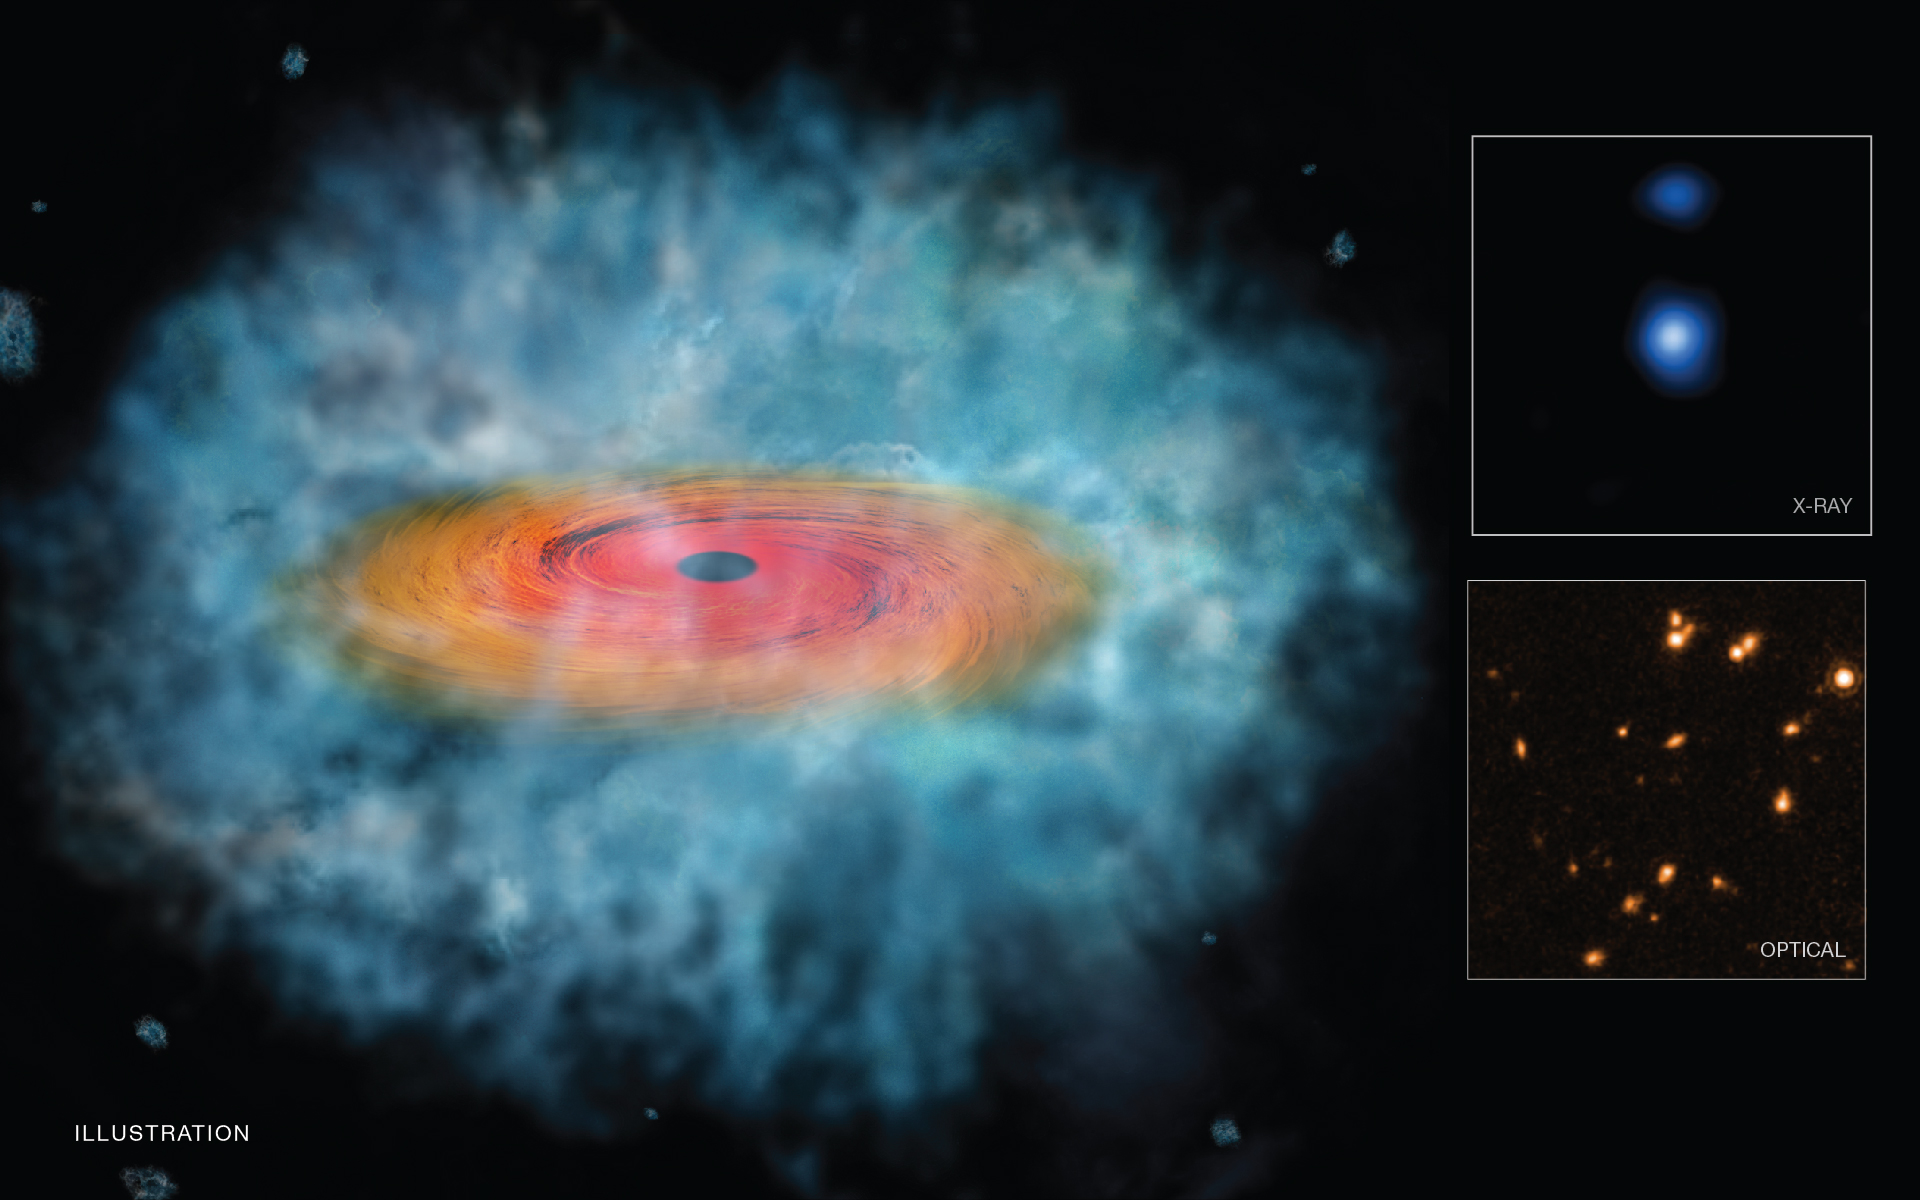 New Study Offers New Theory of Black Hole Formation